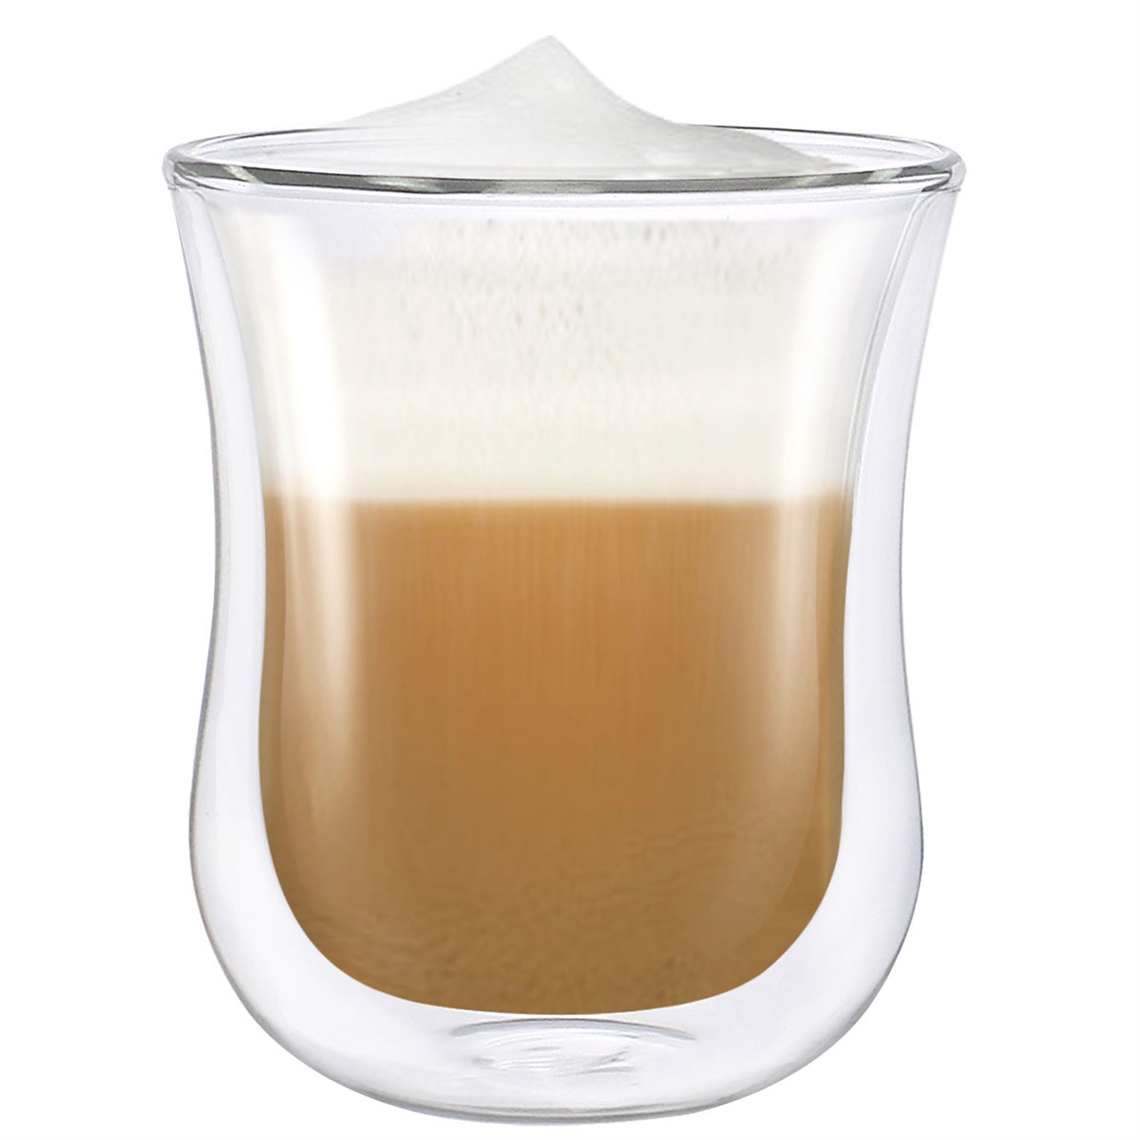 View more schott zwiesel tritan crystal glass from our Tea & Coffee Cups range